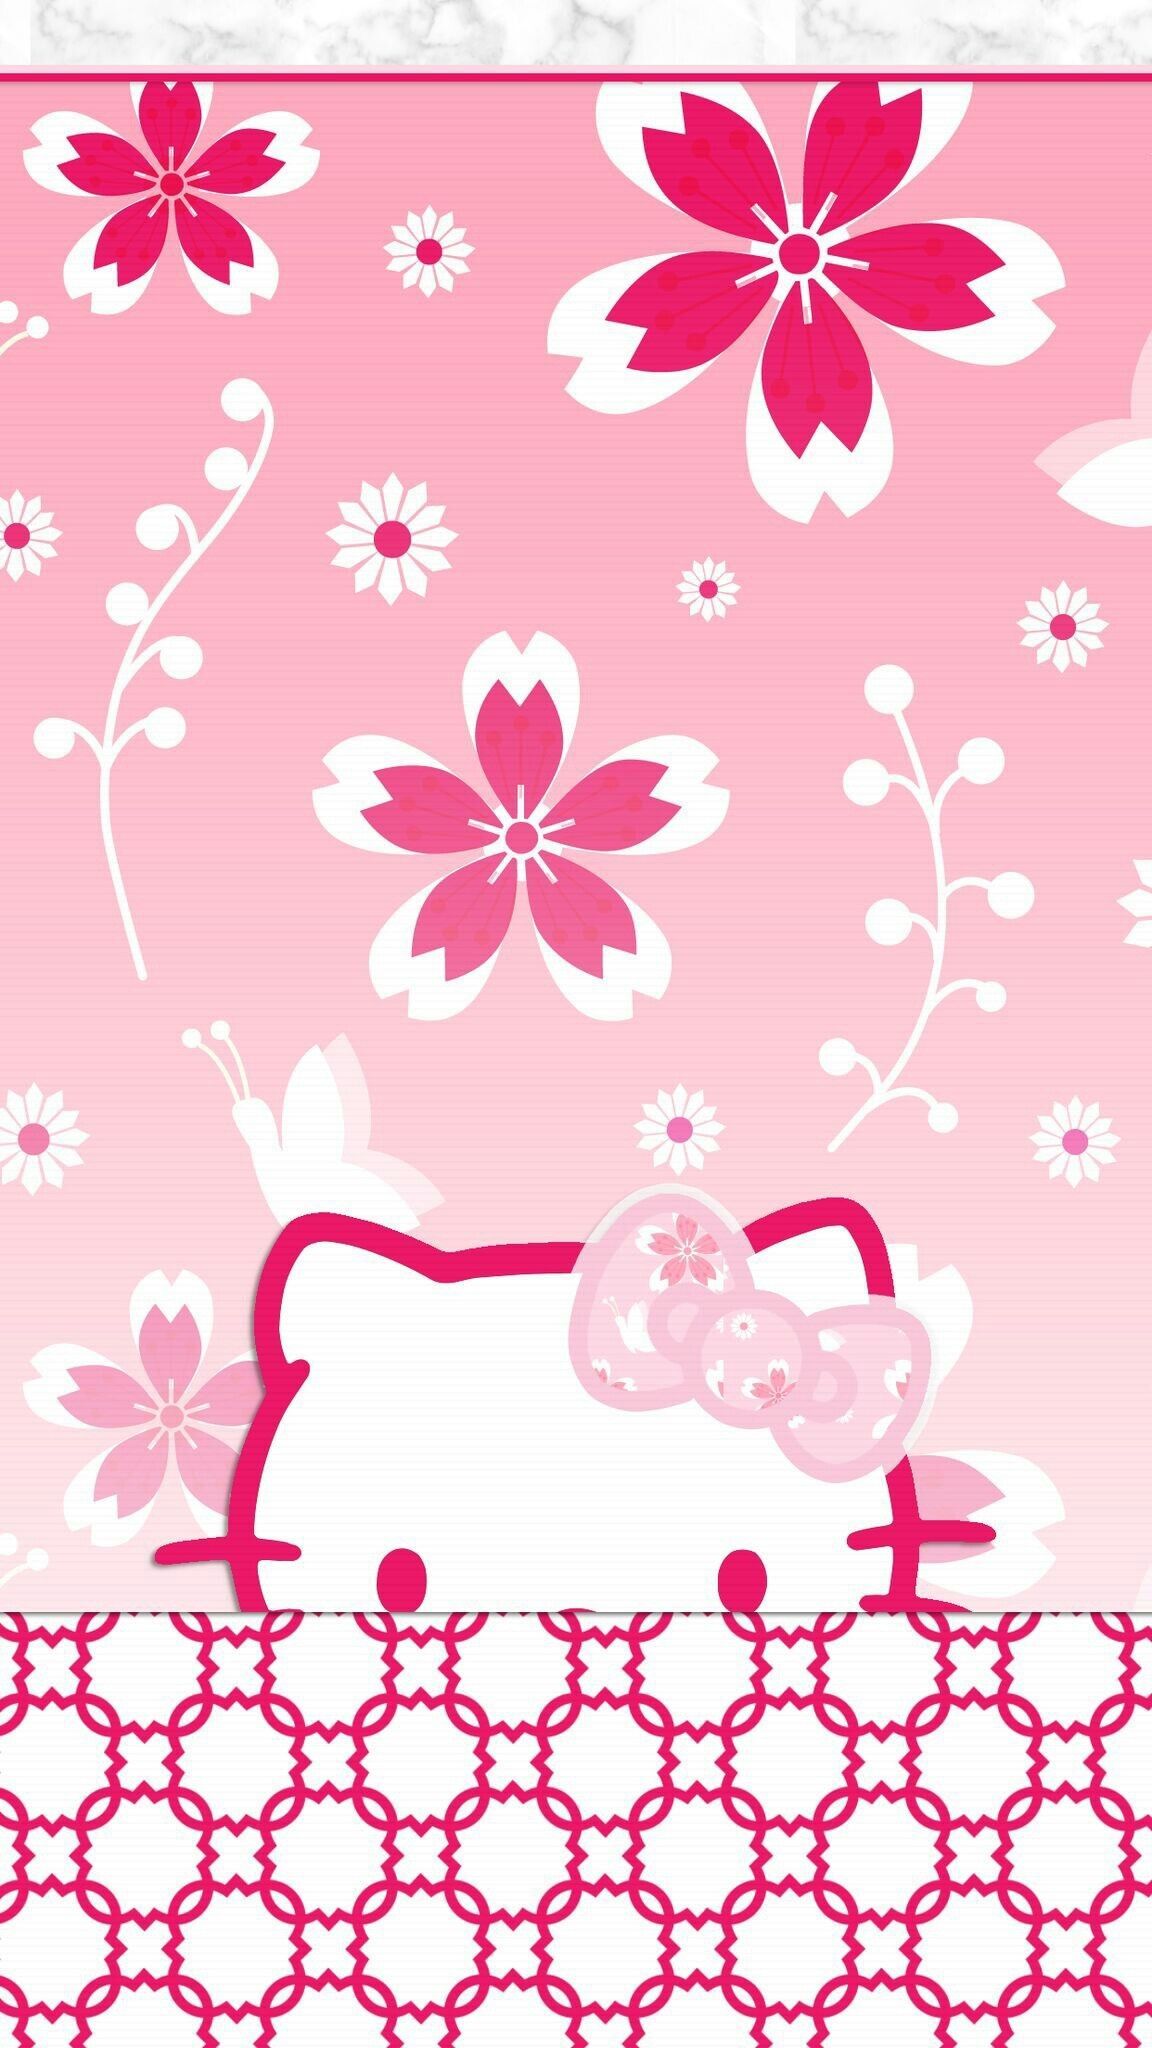 50+] Hello Kitty Wallpaper for iPhone